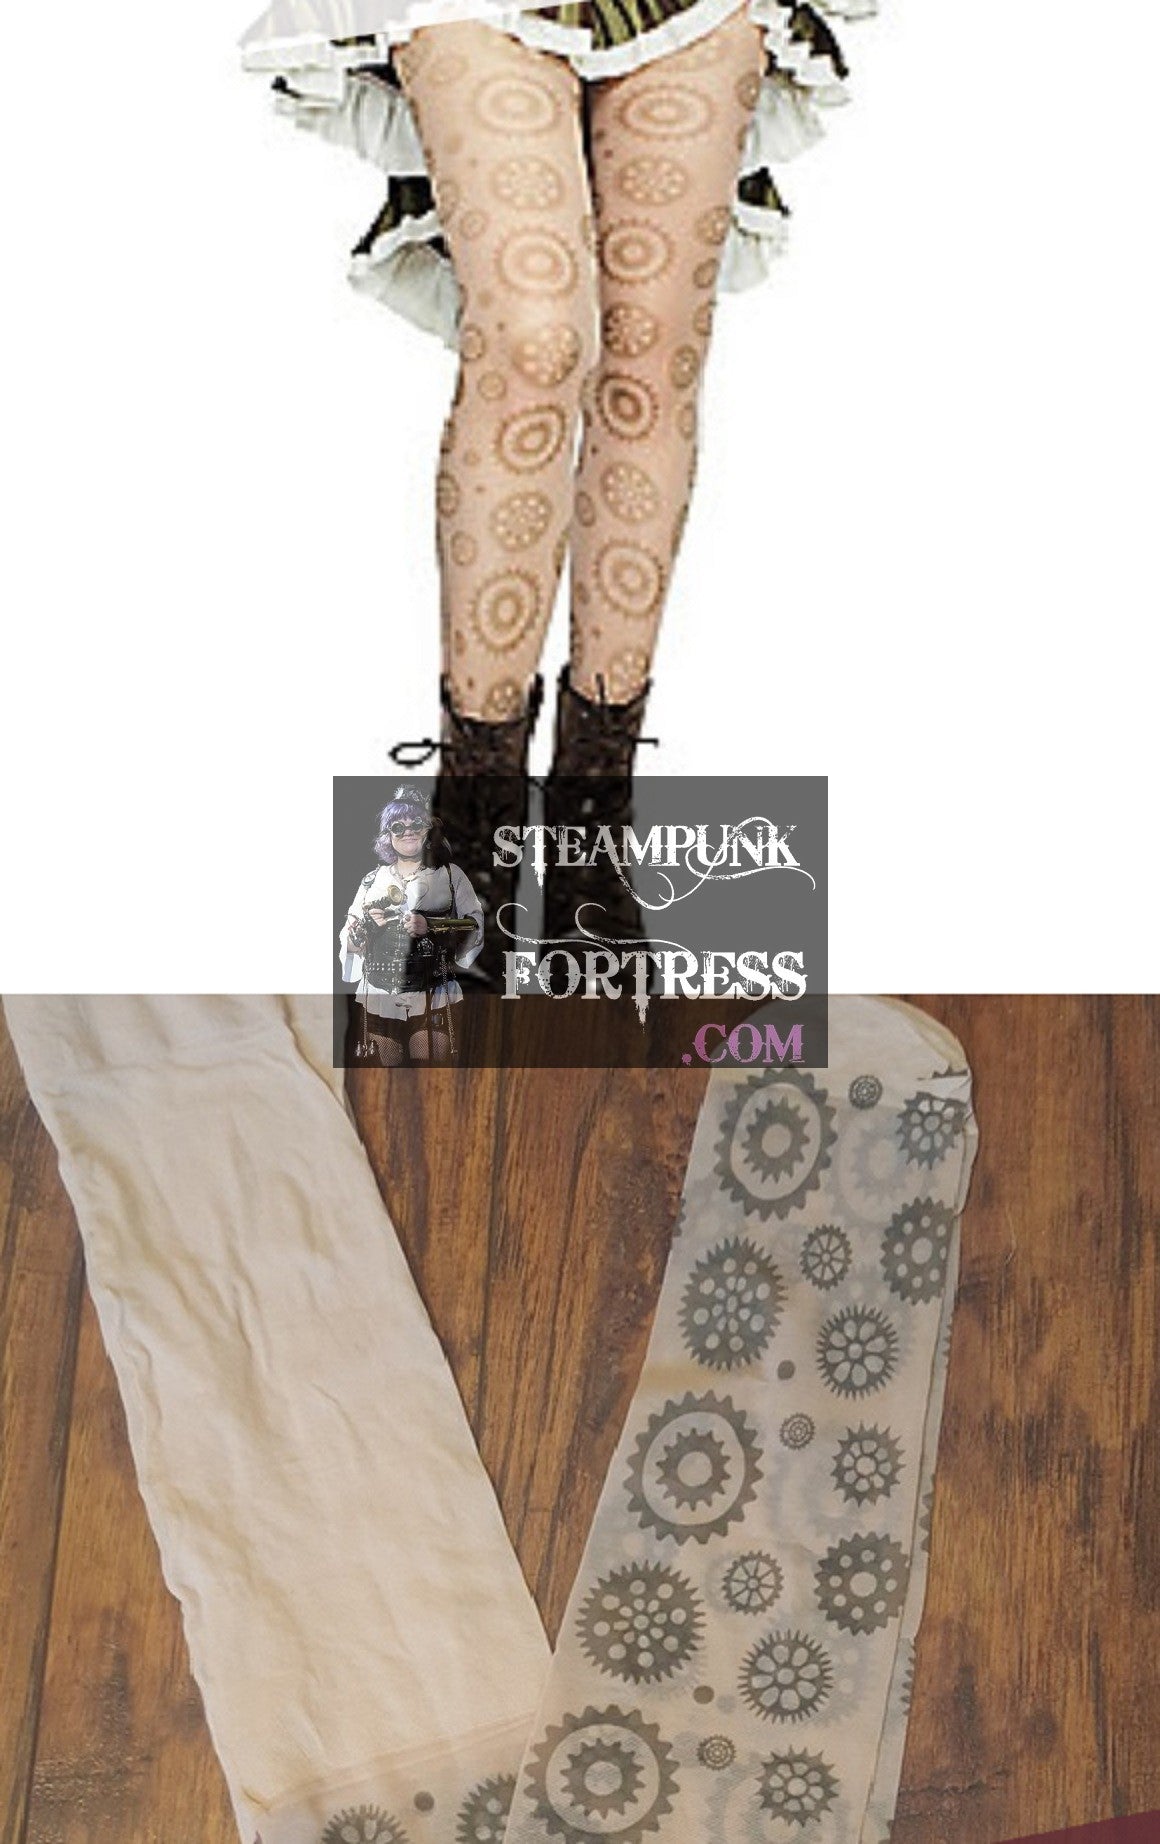 SHEER PANTYHOSE GEARS STEAMPUNK TIGHTS NYLONS HOSIERY STOCKINGS ONE SIZE FITS MOST - NEW - MASS PRODUCED